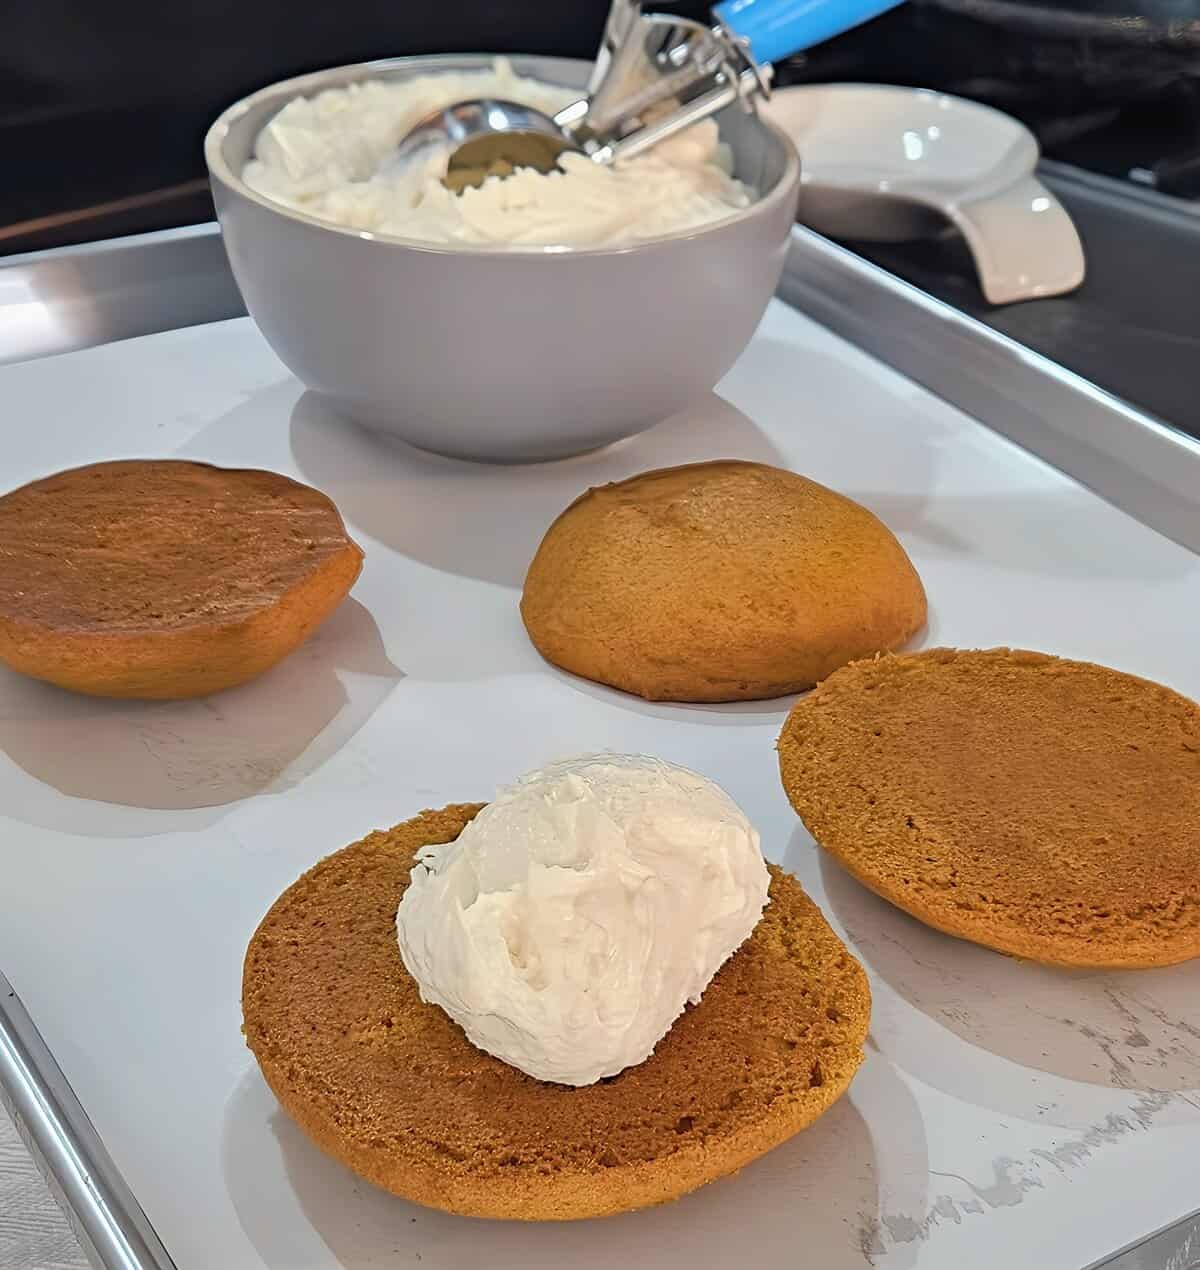 assembly of pumpkin whoopie pies; one cake circle with a scoop f filling on top, three cakes set aside naked, bowl of filling with a scoop in it, ready to scoop more